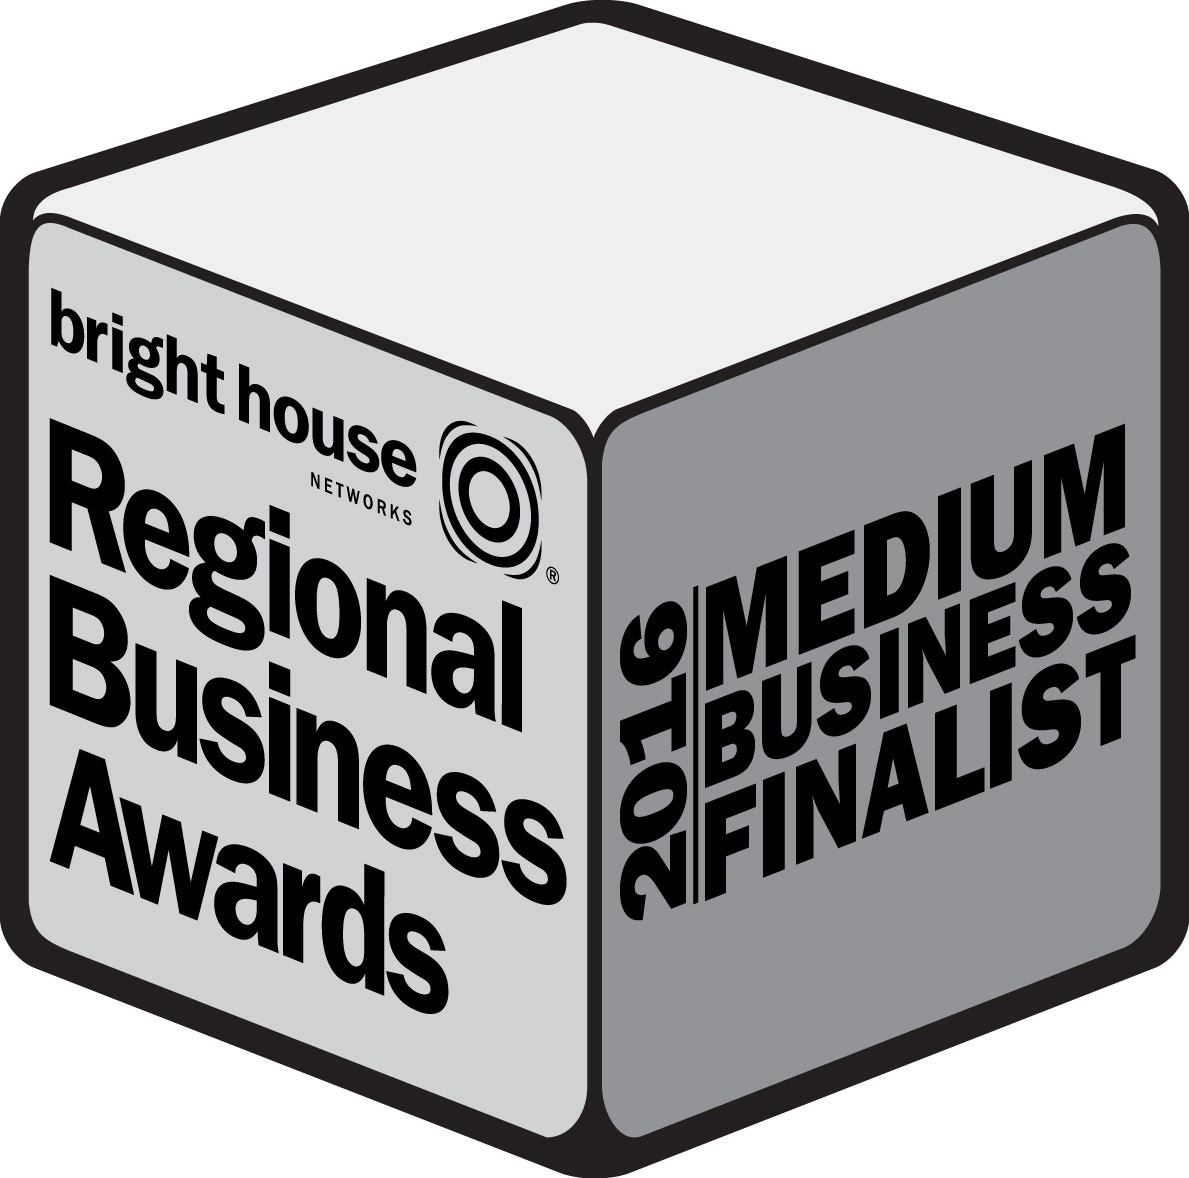 Hernon Manufacturing has been selected as one of the TOP 10 finalists in the Medium Business Category of the Bright House Networks Regional Business Awards.